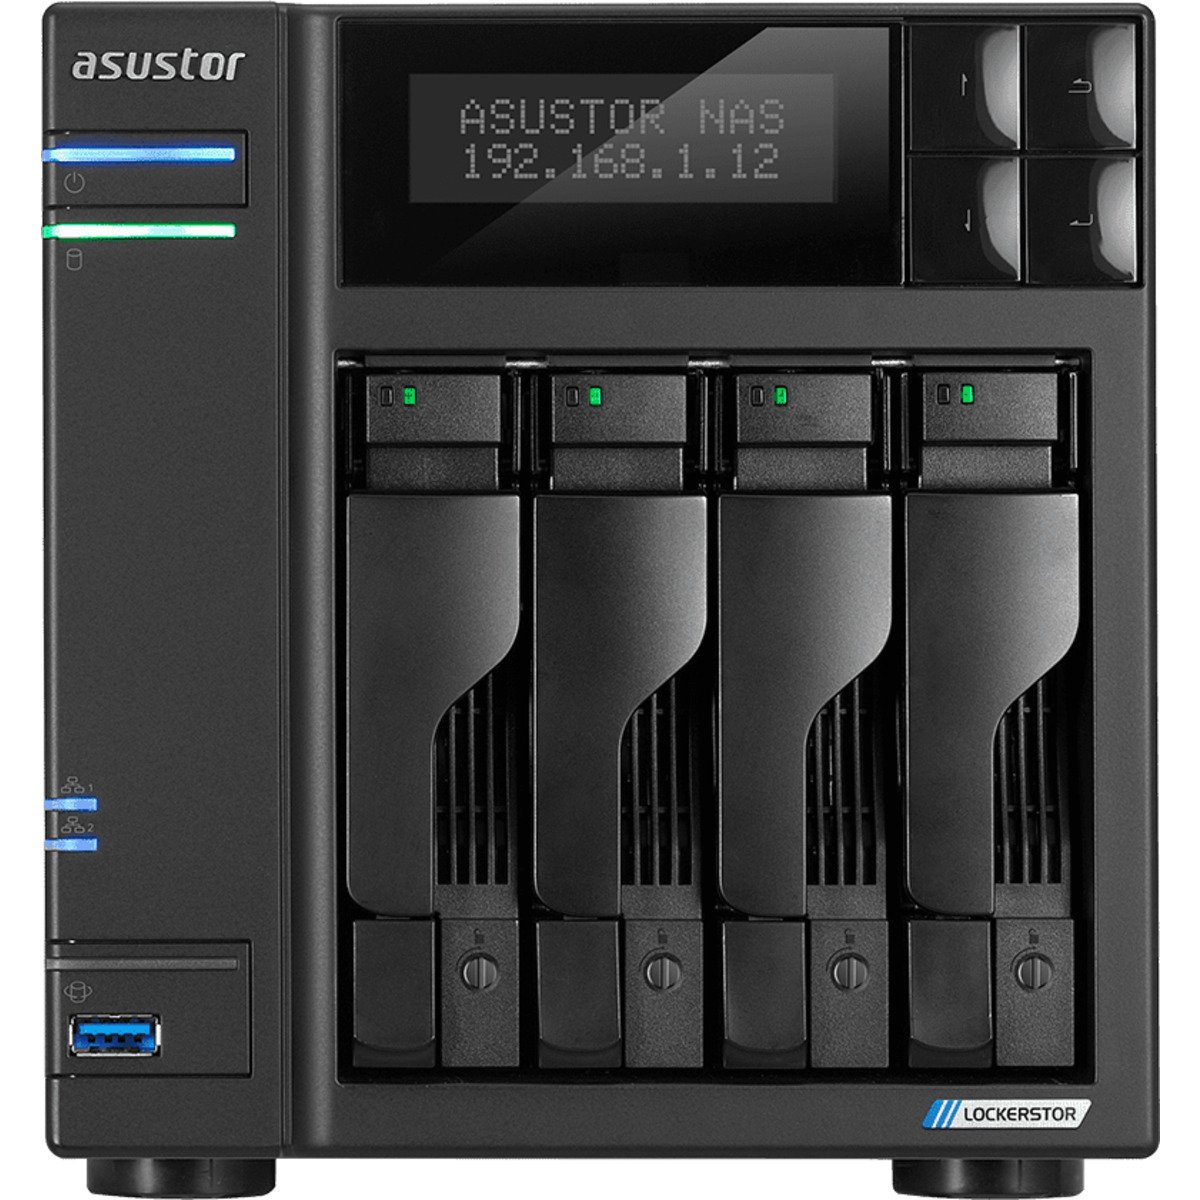 ASUSTOR AS6604T Lockerstor 4 64tb 4-Bay Desktop Multimedia / Power User / Business NAS - Network Attached Storage Device 4x16tb Western Digital Ultrastar DC HC550 WUH721816ALE6L4 3.5 7200rpm SATA 6Gb/s HDD ENTERPRISE Class Drives Installed - Burn-In Tested - FREE RAM UPGRADE AS6604T Lockerstor 4